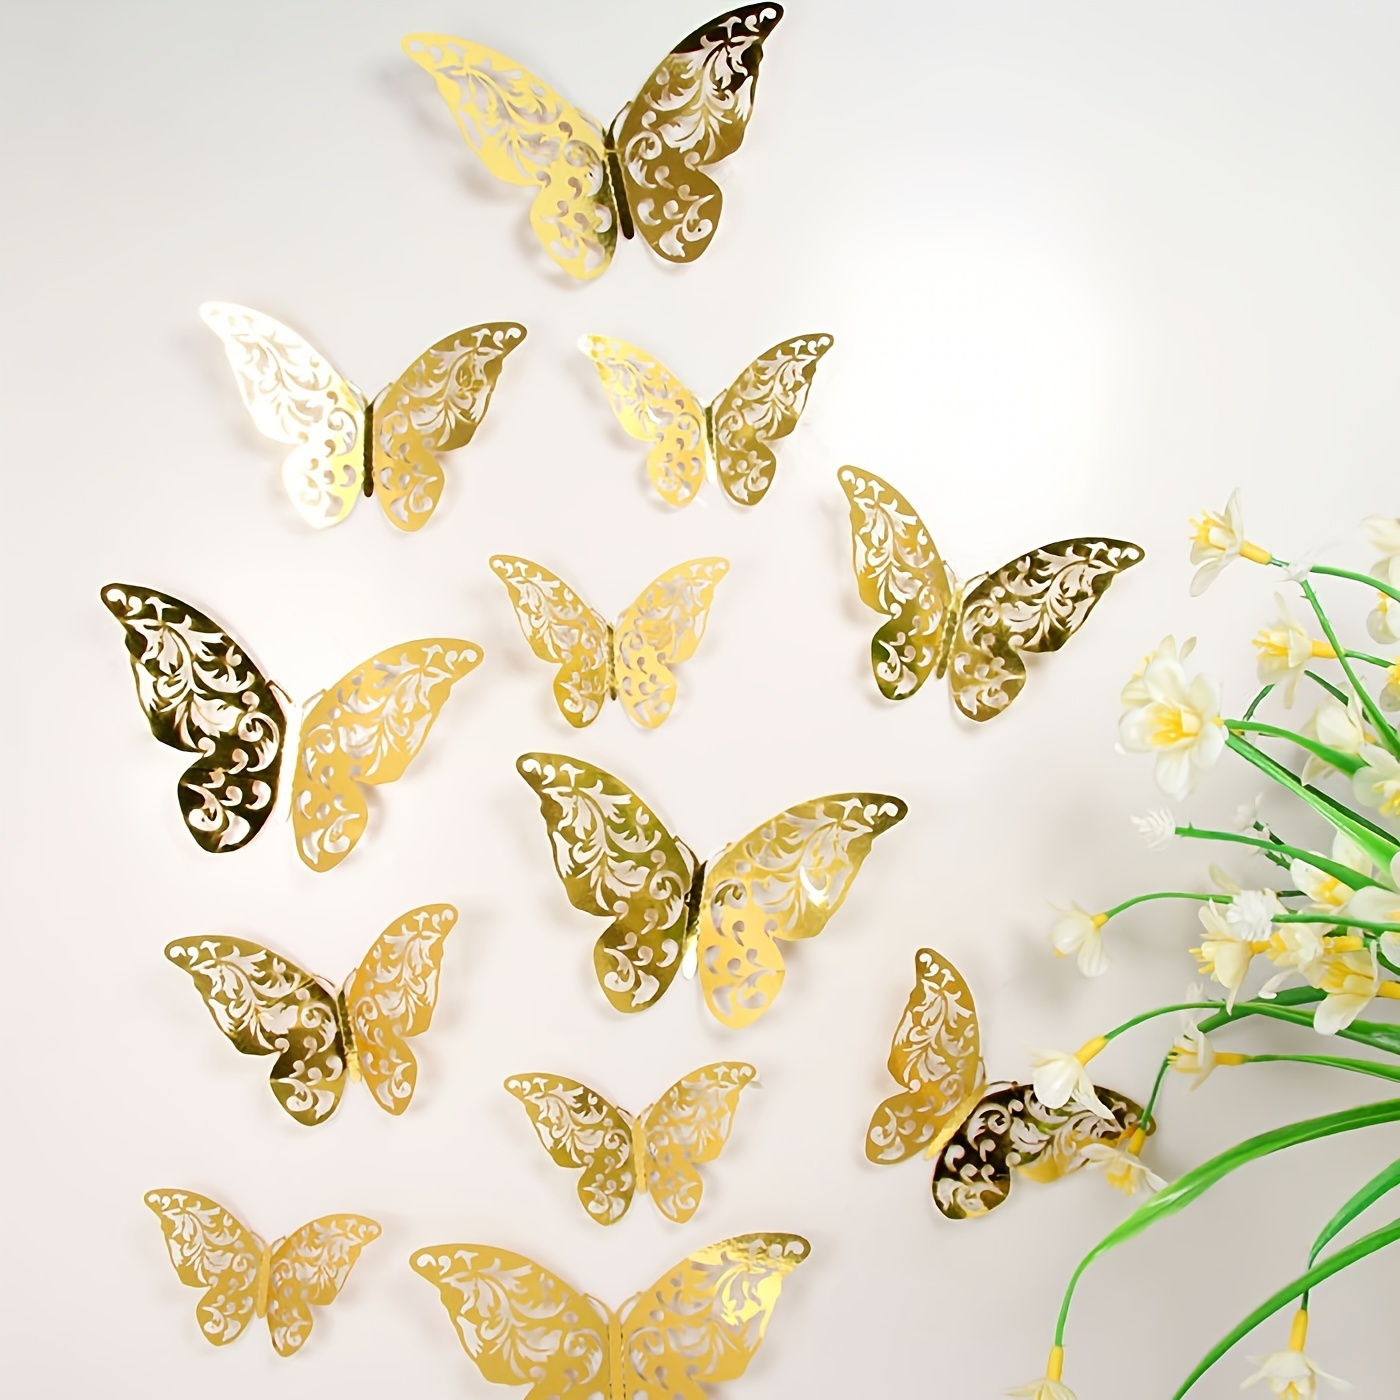 

72pcs, Golden Butterfly Decorations - 3d Wall Art For Parties, Crafts, And Baby Showers - Easy To Apply Stickers For Beautiful And Elegant Decor